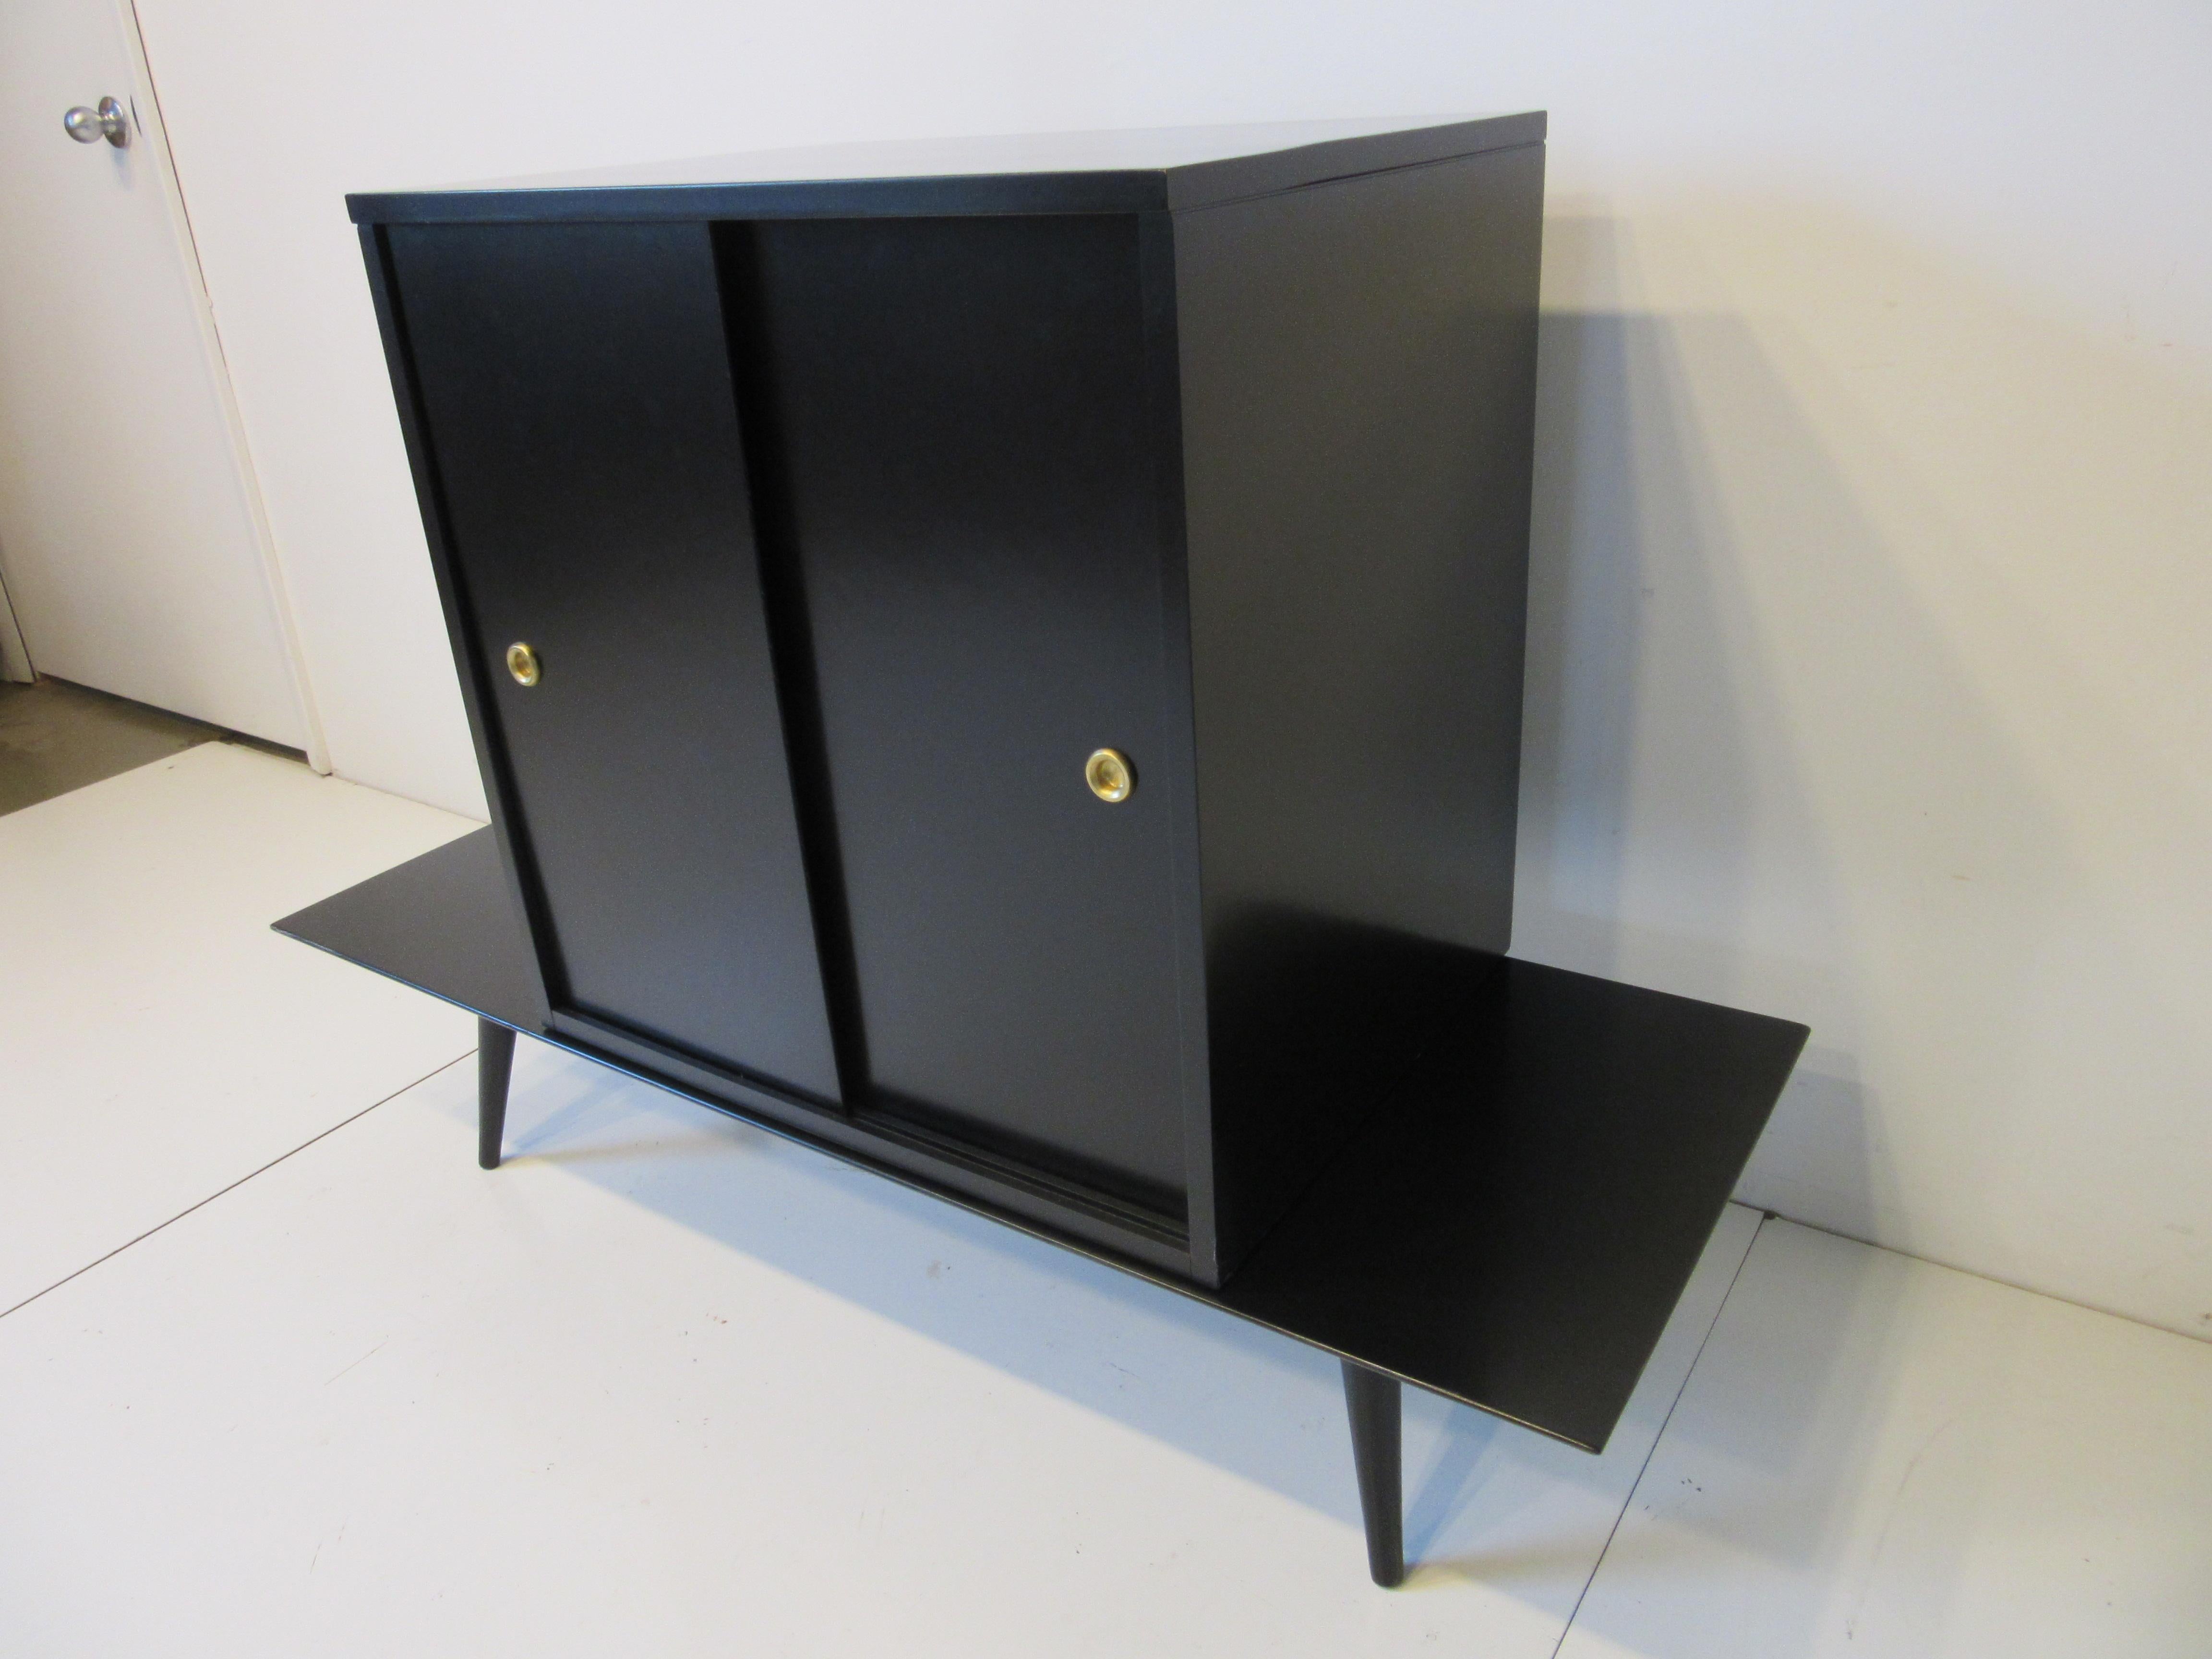 A cabinet sitting on a bench base with conical legs, having one fixed shelve with sliding doors and storage finished in satin black having brass finger pulls. Solid maple wood construction manufactured by the Winchendon Furniture company from the